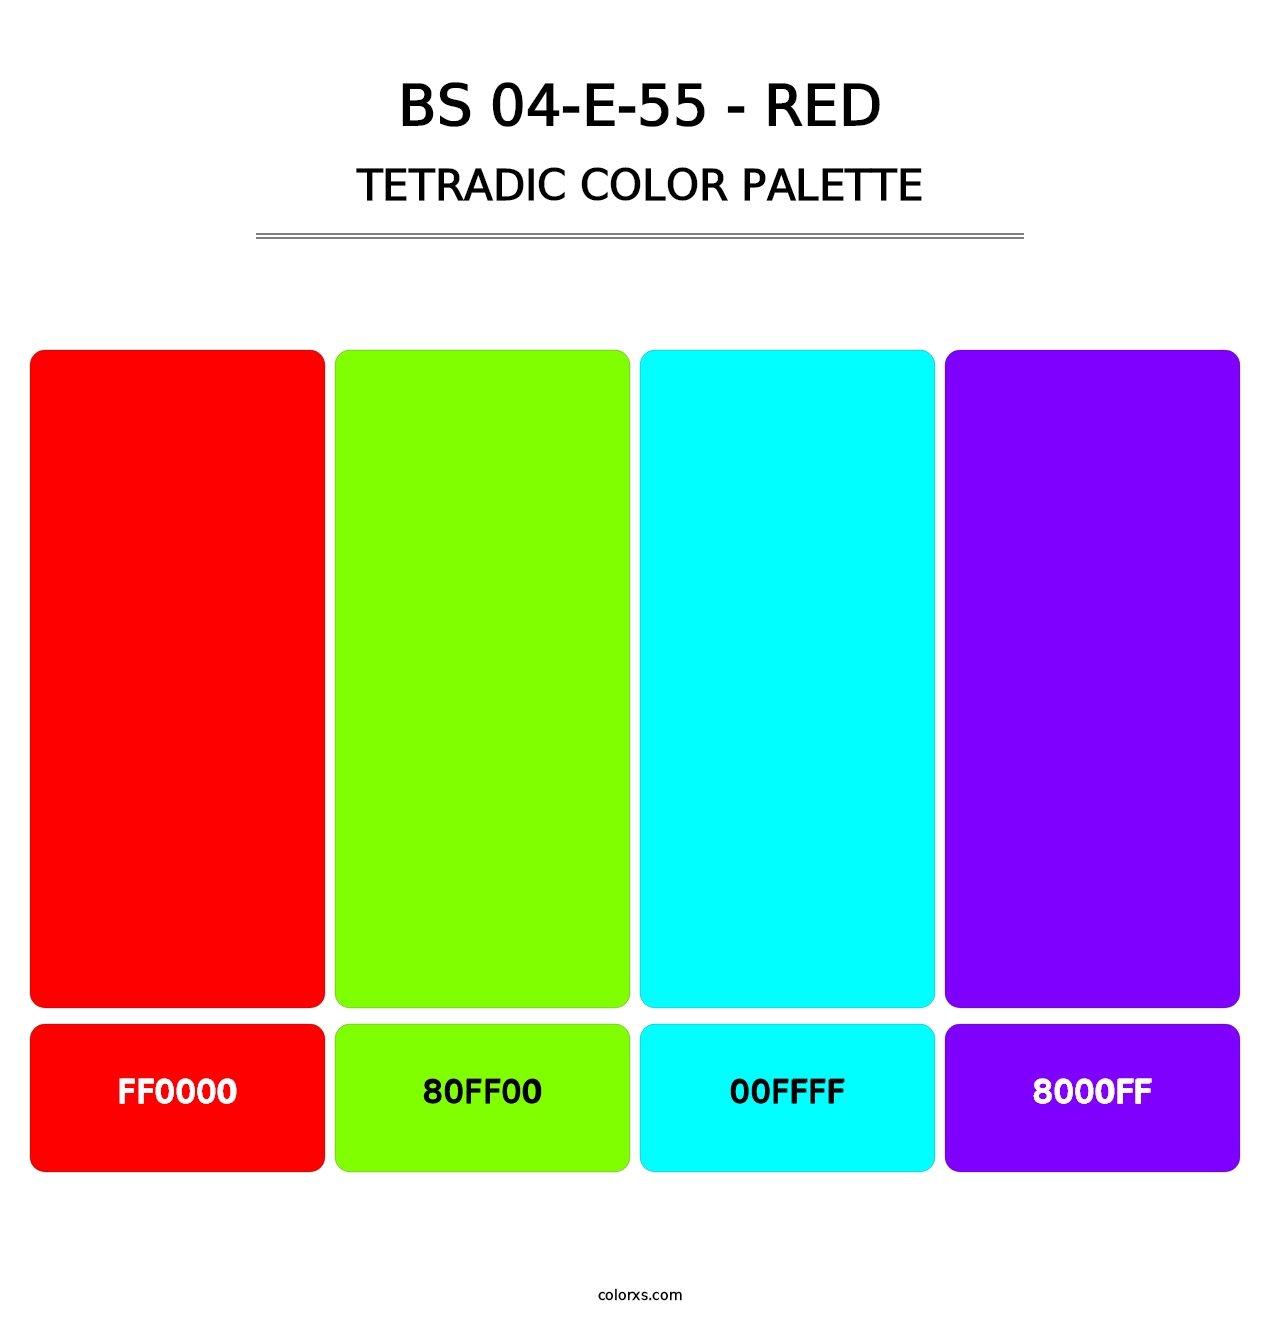 BS 04-E-55 - Red - Tetradic Color Palette